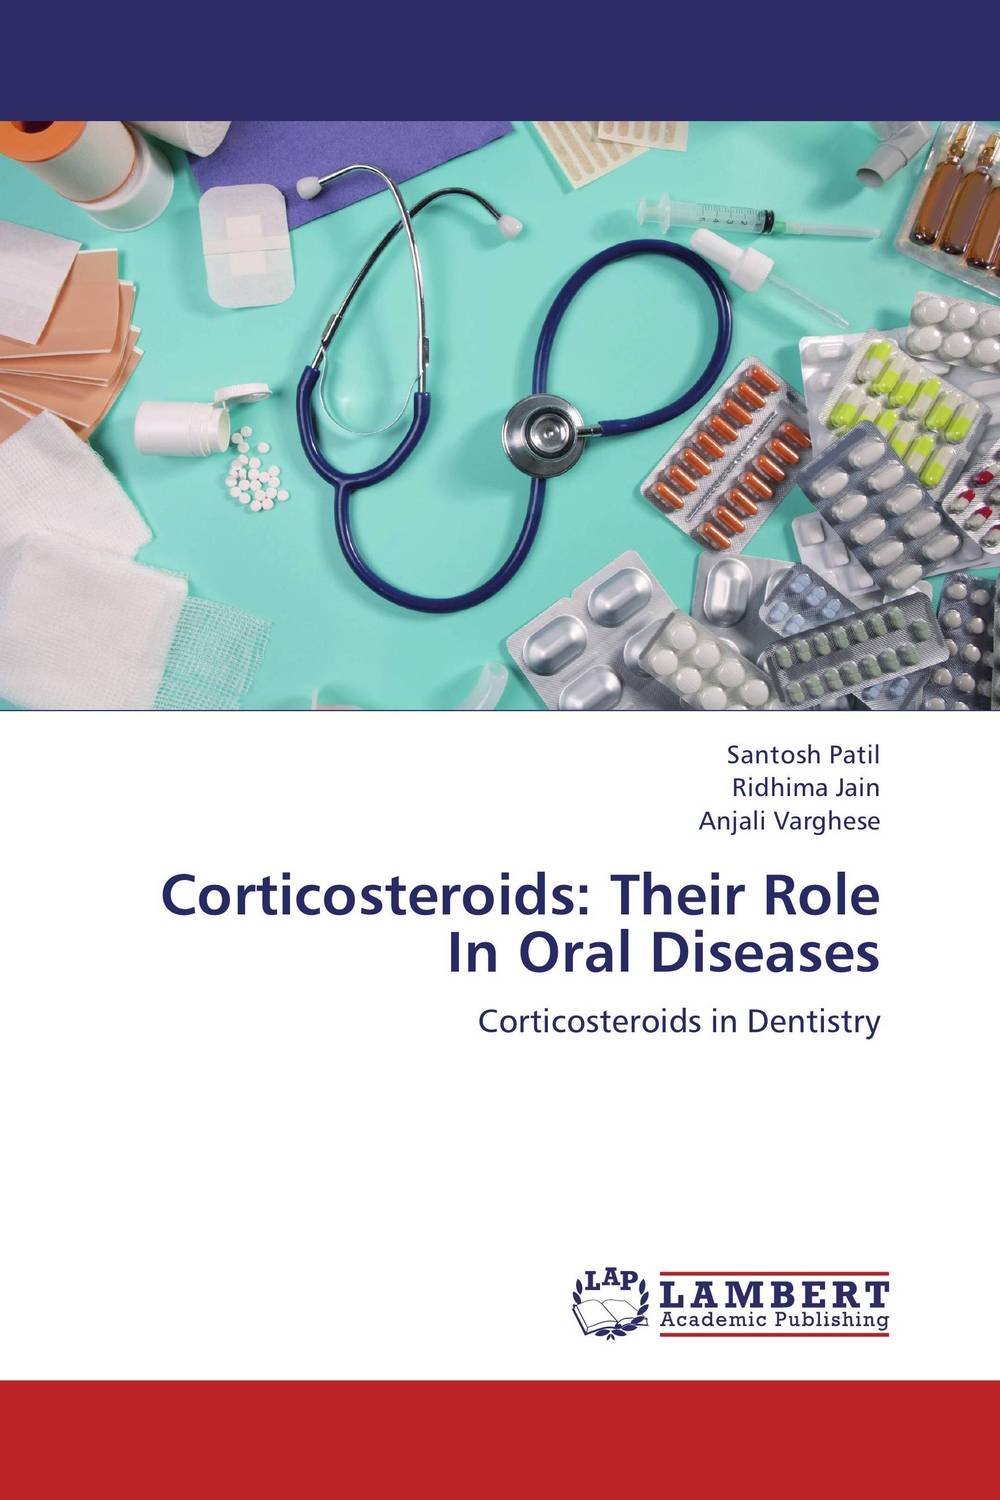 Corticosteroids: Their Role In Oral Diseases